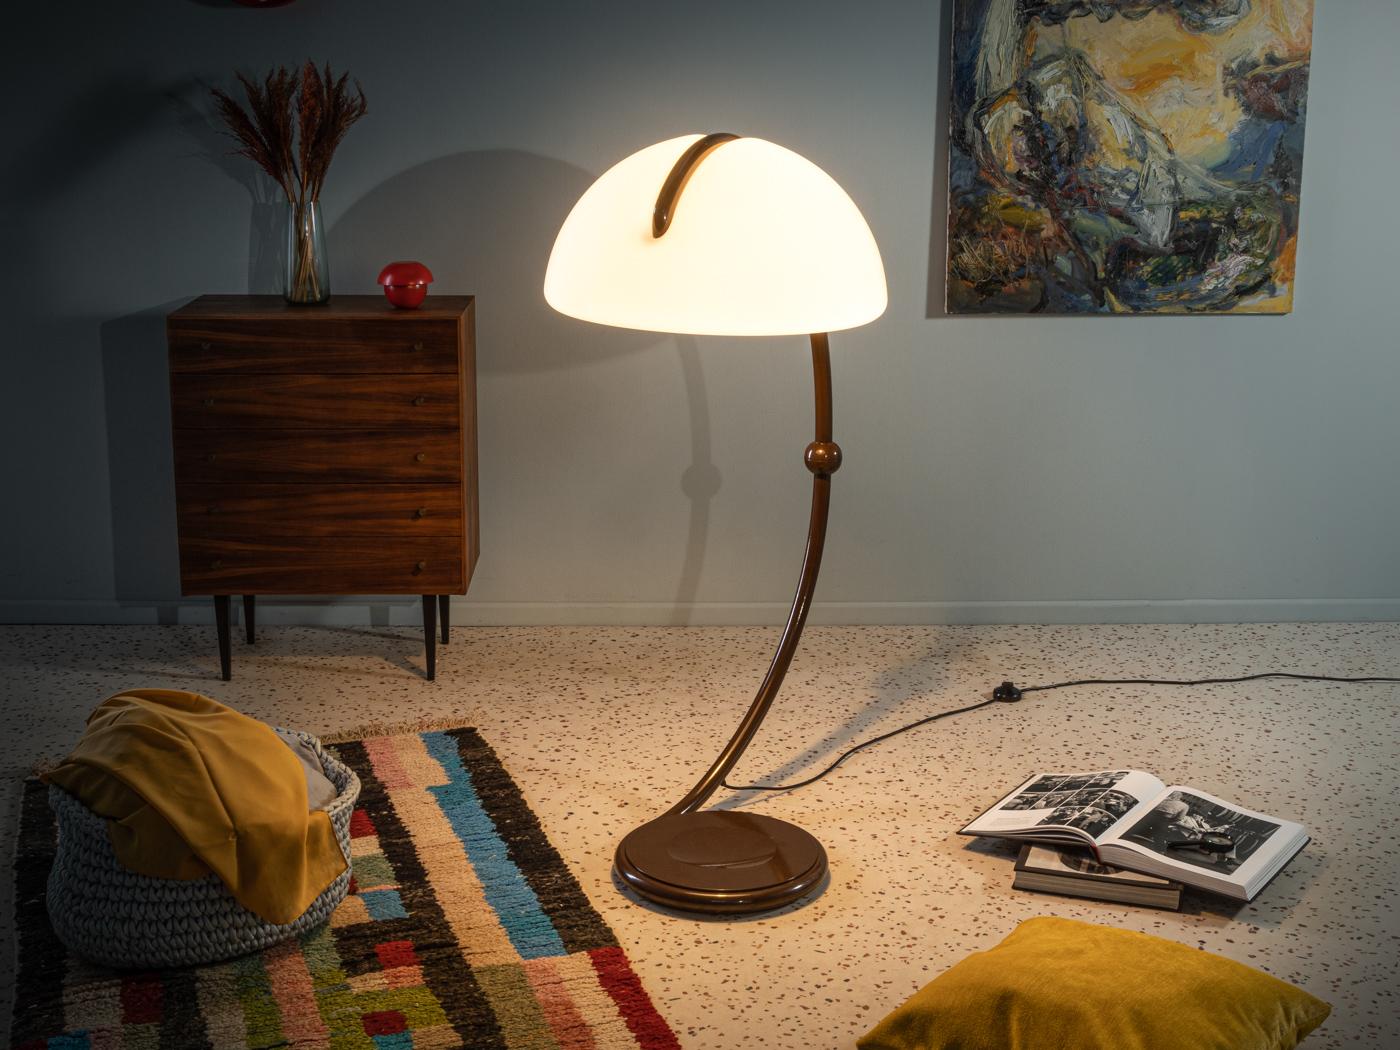 Unique Serpente floor lamp, model 2131, from the 1960s by Elio Martinelli for Martinelli Luce. Swivel metal arm in chocolate brown with a methacrylate lampshade.

Quality features:
Accomplished design: perfect proportions & visible attention to